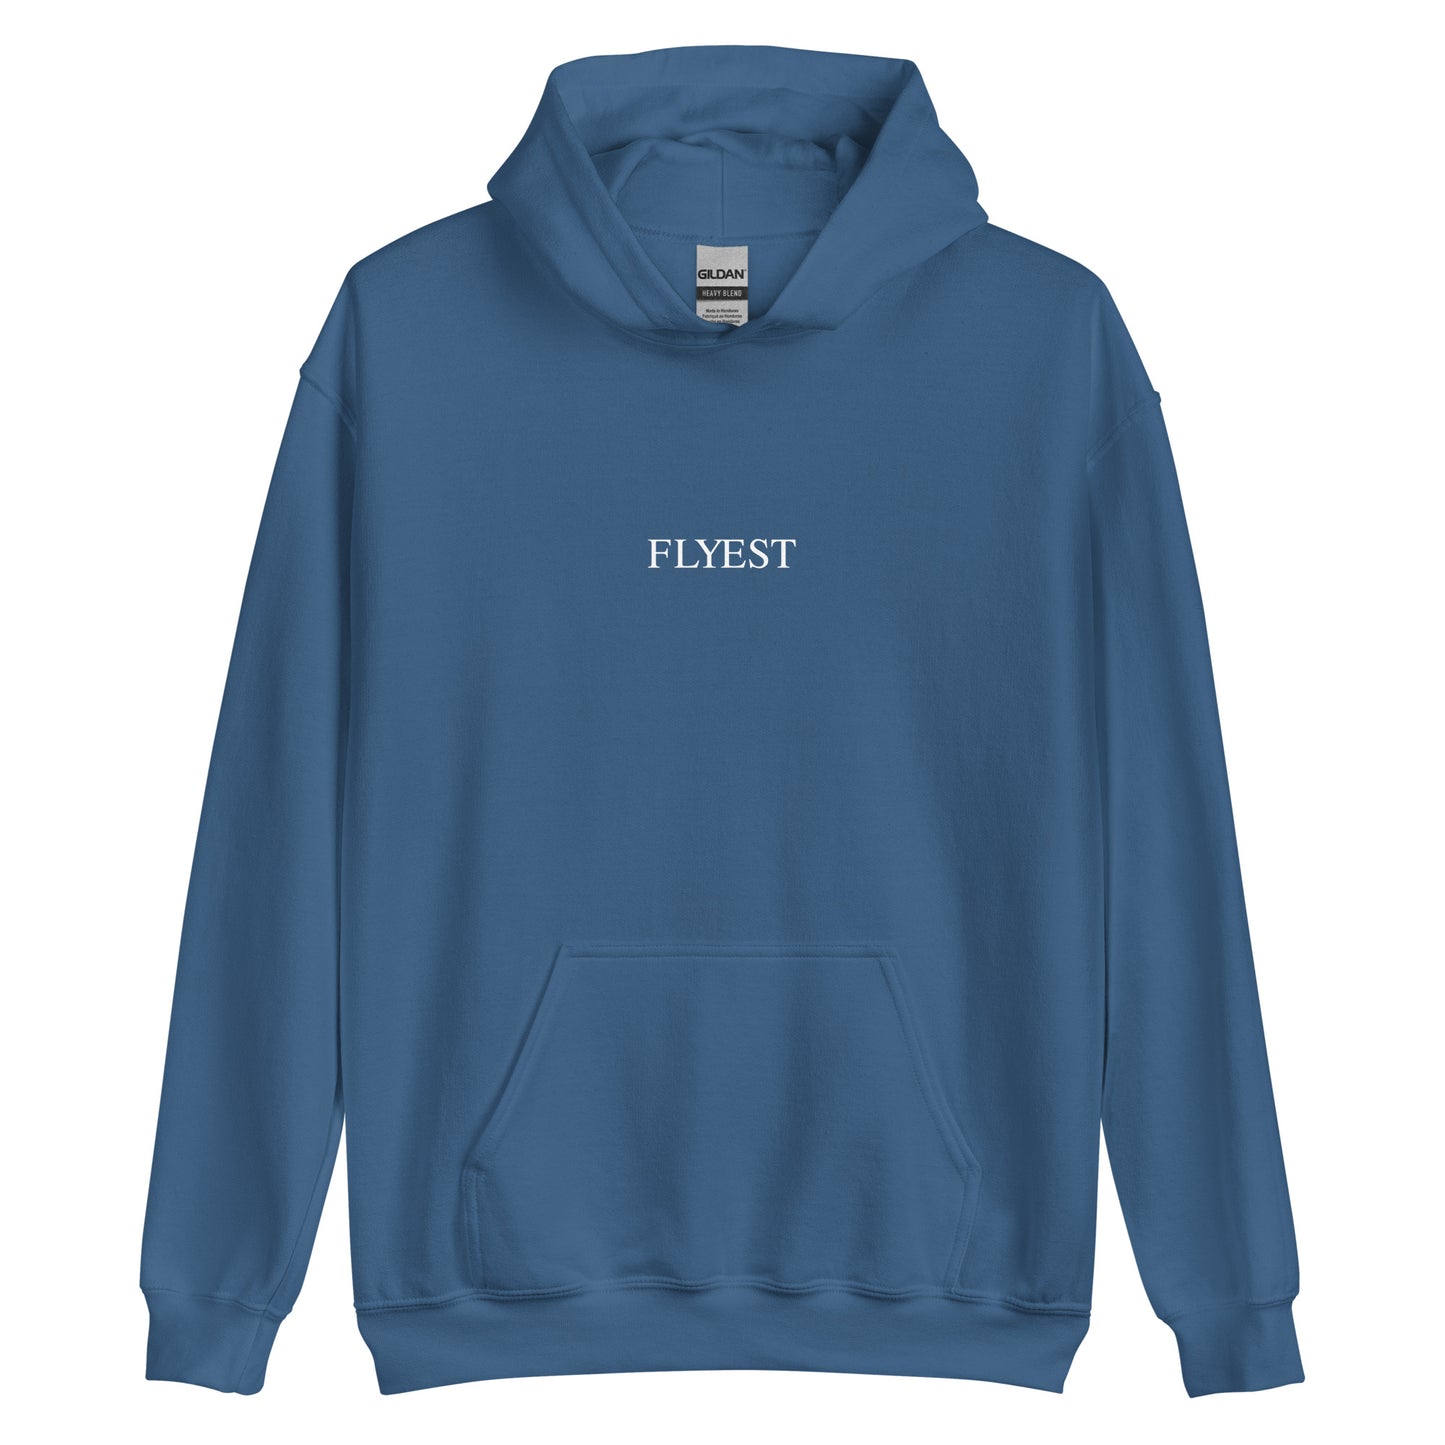 Flyest Large but Unseen Women's hoodie